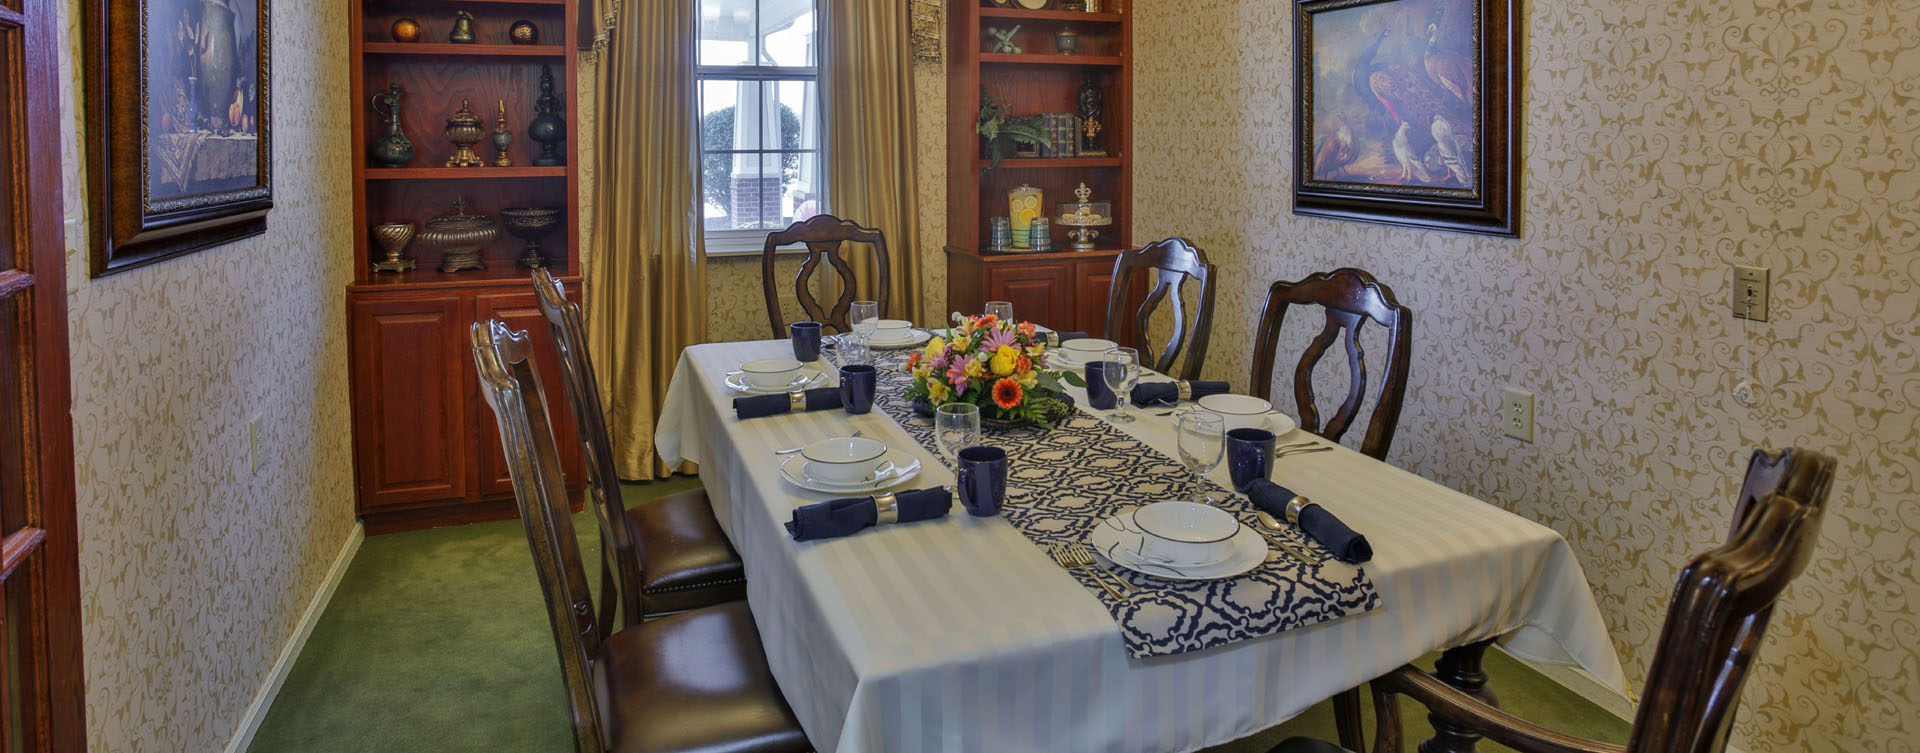 Celebrate special occasions in the private dining room at Bickford of Lafayette